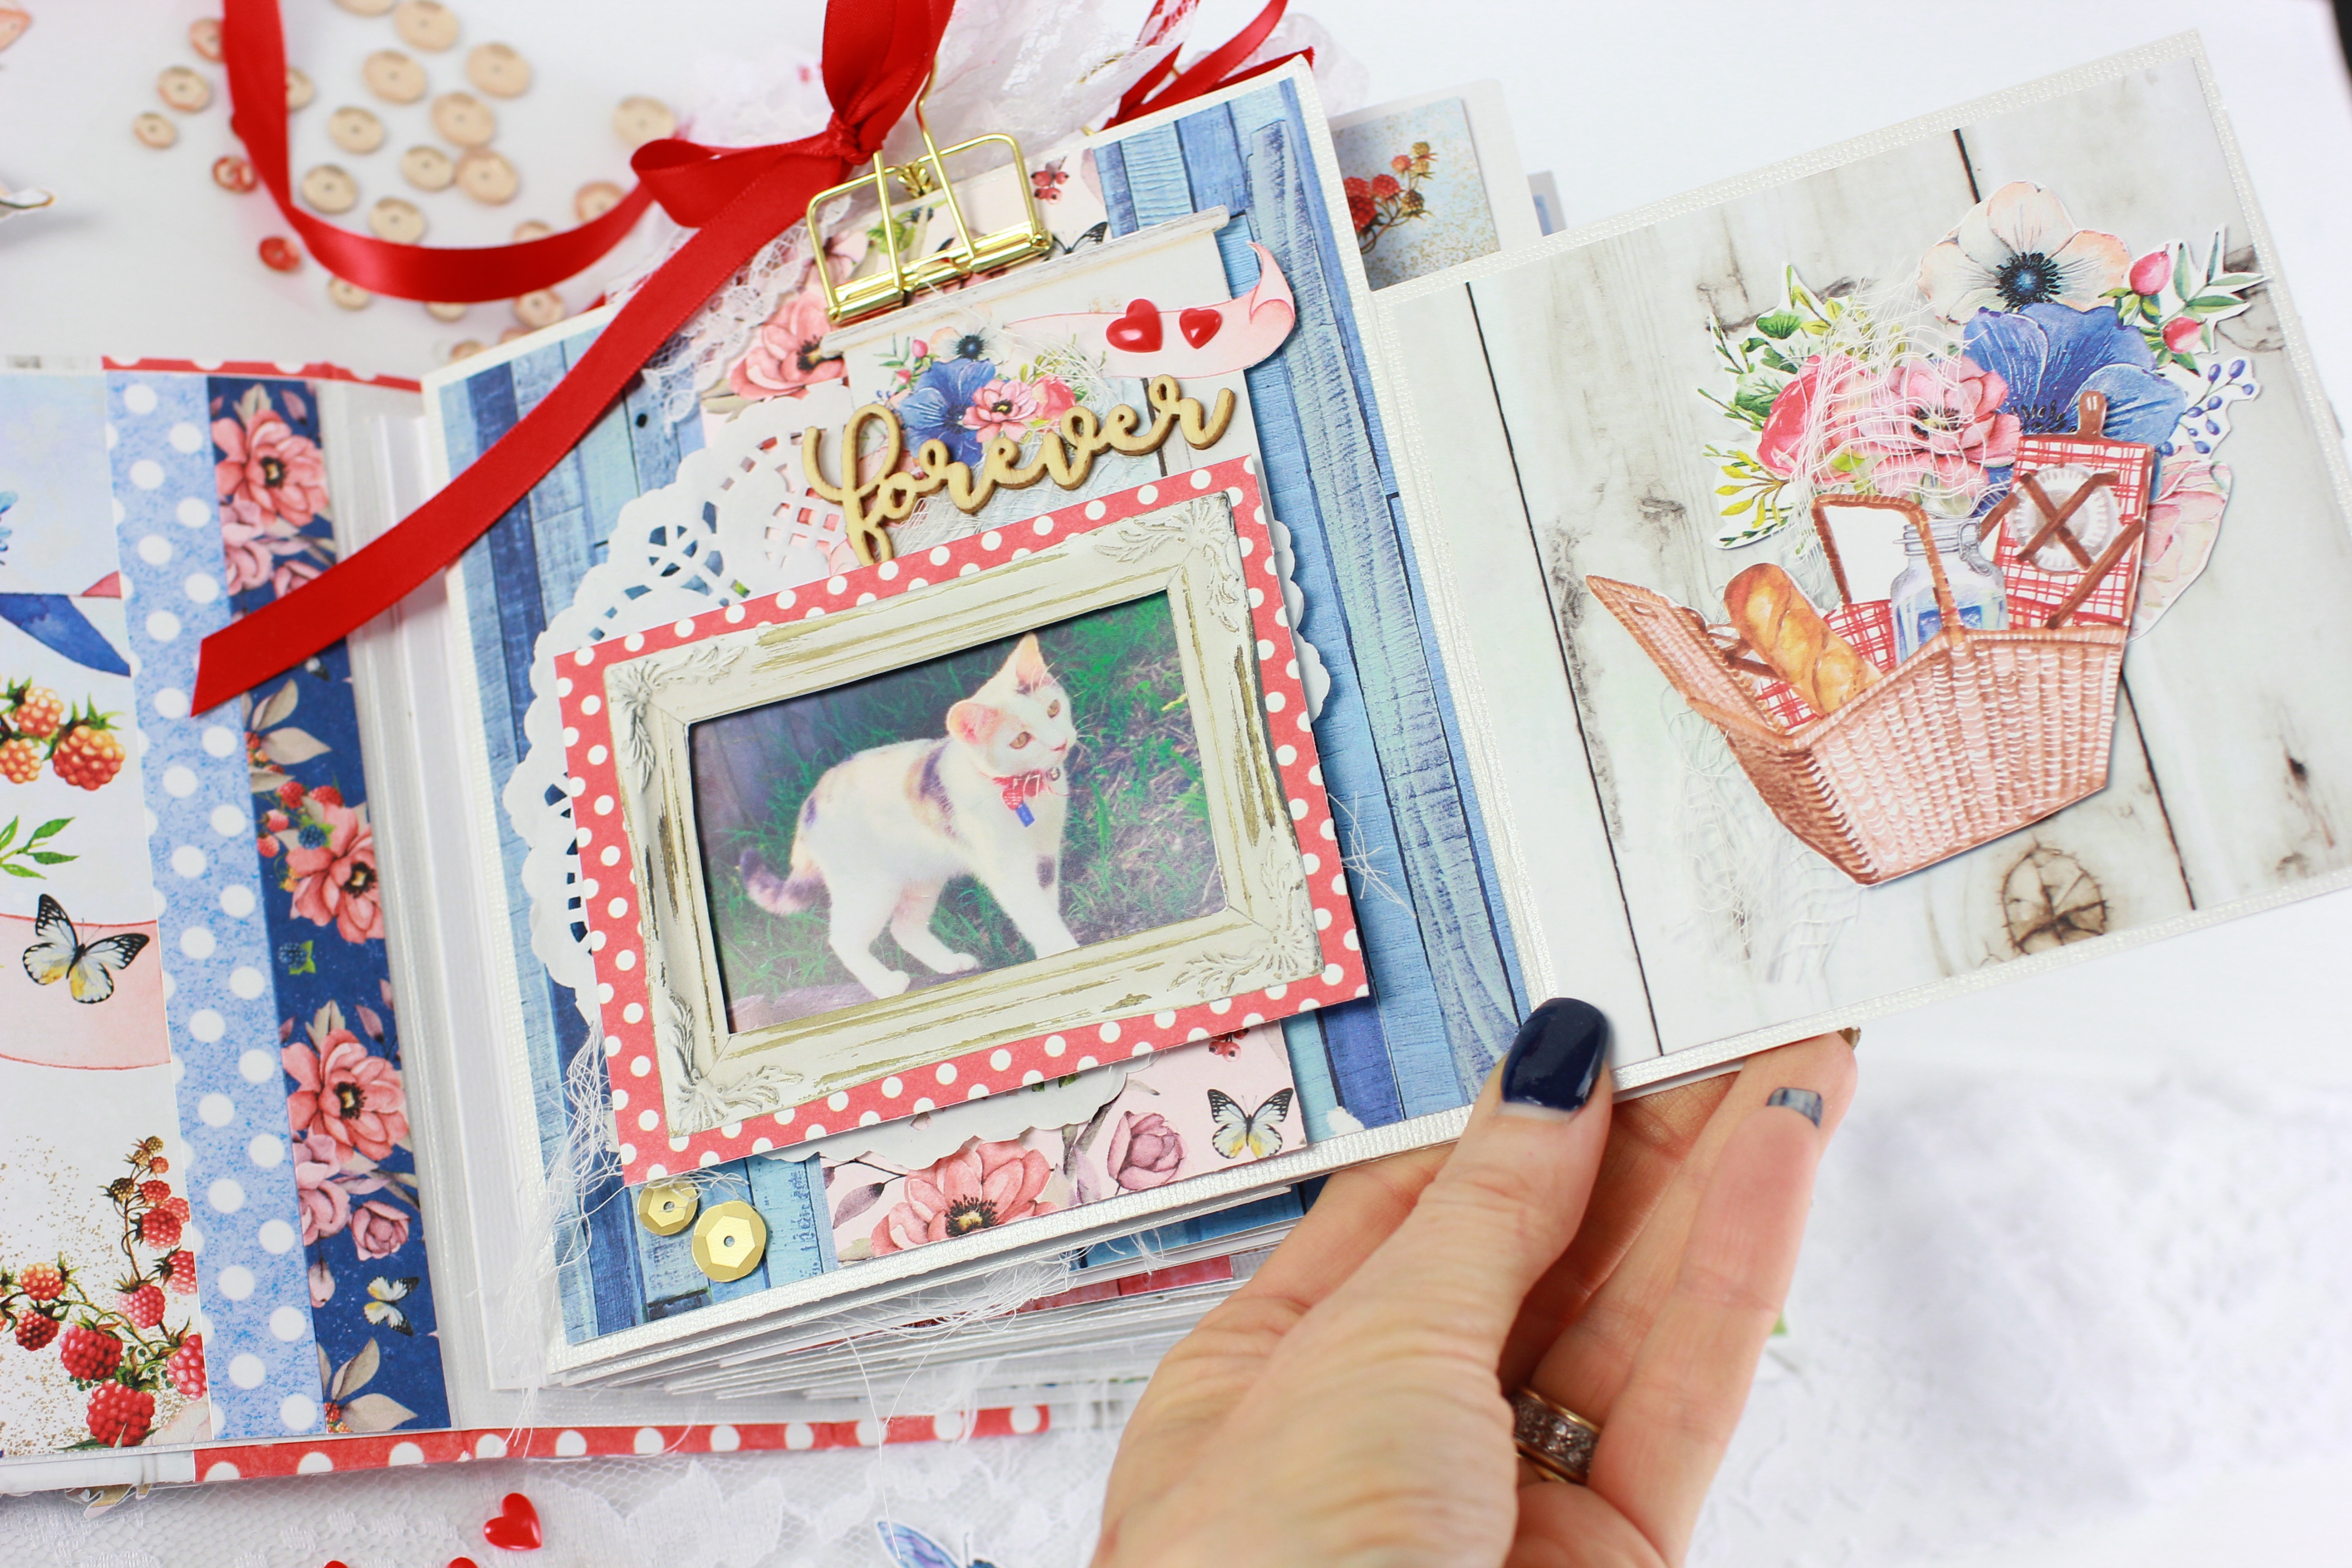 How to make a Mini Album, from scratch. Step-by-step Tutorial Videos and Printable Tutorials are FREE. This album was made using MINTAY Berrylicious Papers and created by Alicia McNamara.